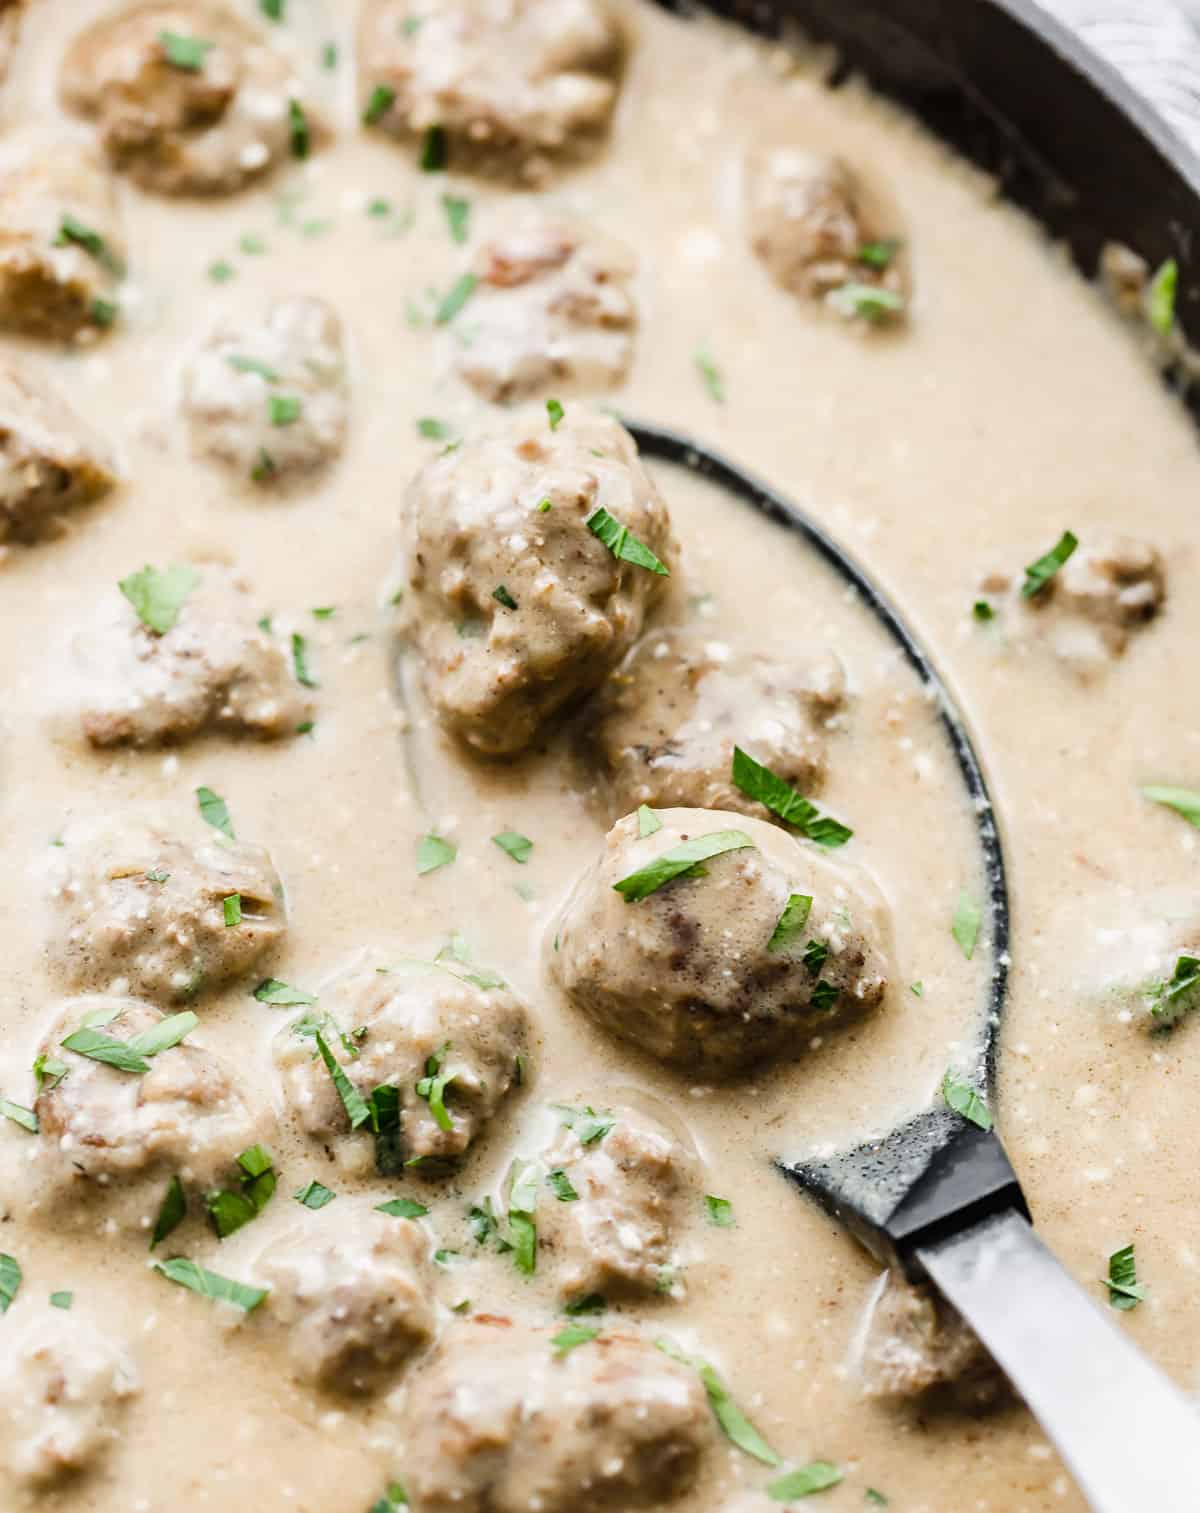 A large spoon scooping into a skillet full of Swedish Meatballs and tan colored sauce.